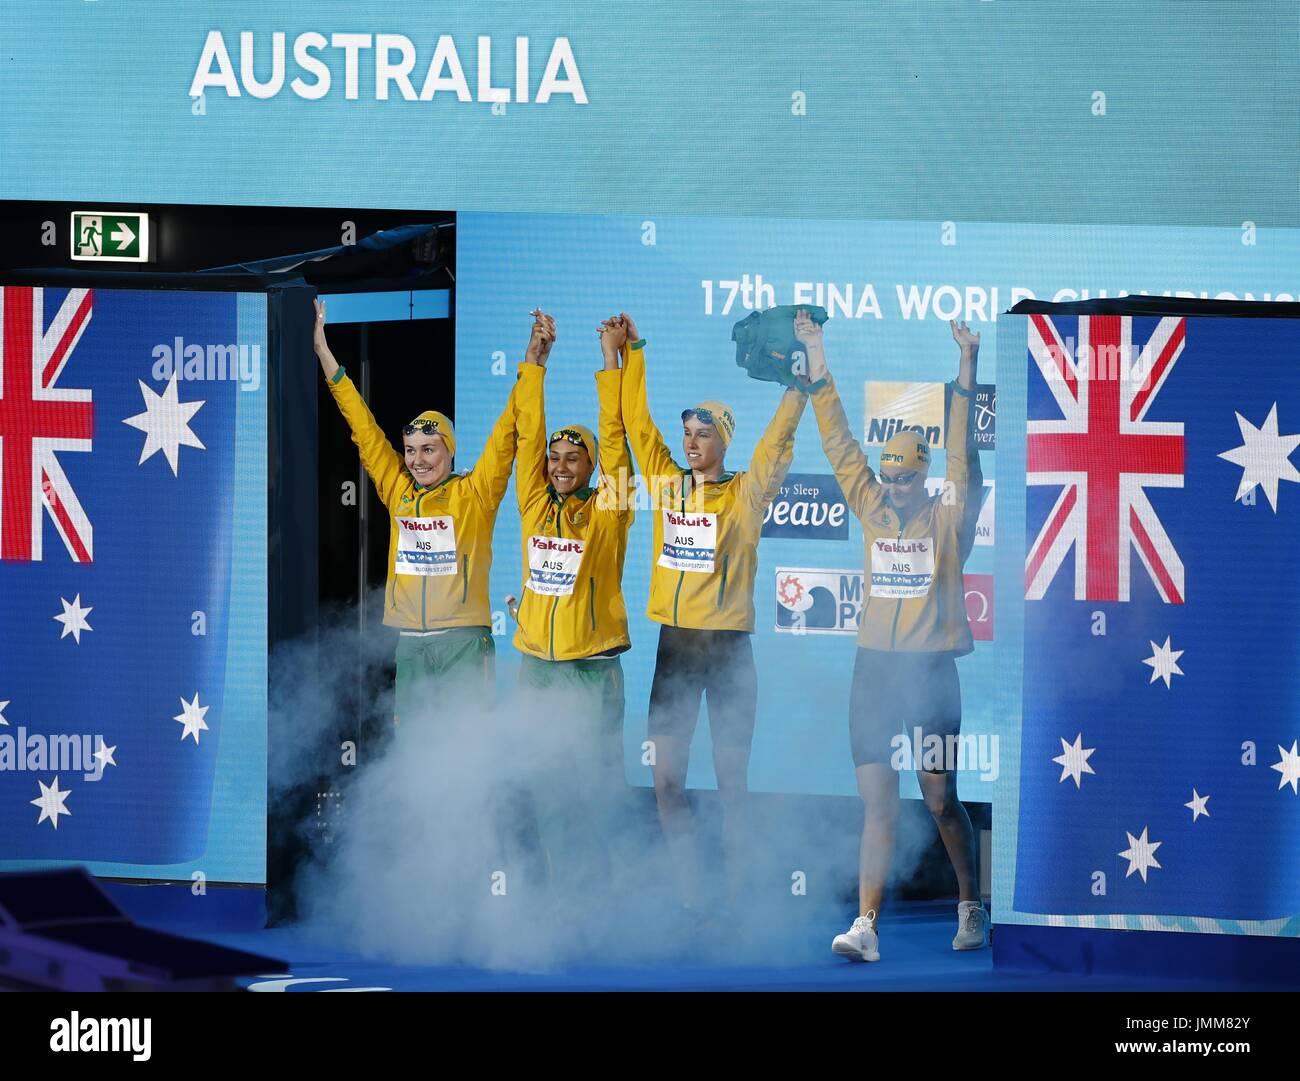 Budapest. 27th July, 2017. Team Australia show up before the women's 4x200m freestyle swimming relay final at the 17th FINA Aquatics World Championships held in Budapest, Hungary on July 27, 2017. Credit: Ding Xu/Xinhua/Alamy Live News Stock Photo